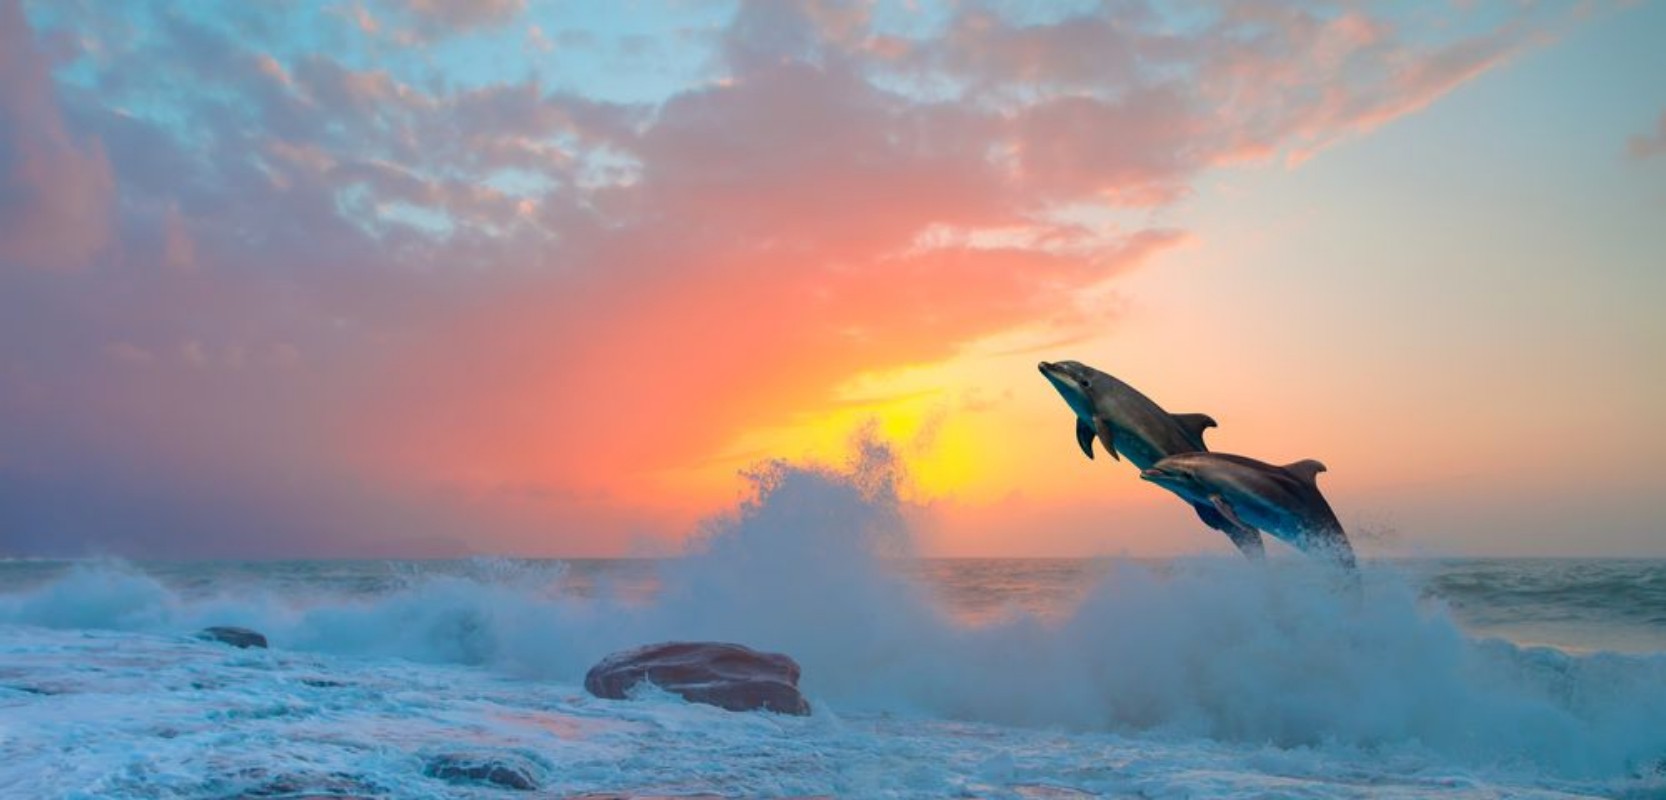 Afbeeldingen van Couple of dolphins jumping on the water at sunset - Beautiful seascape and blue sky 